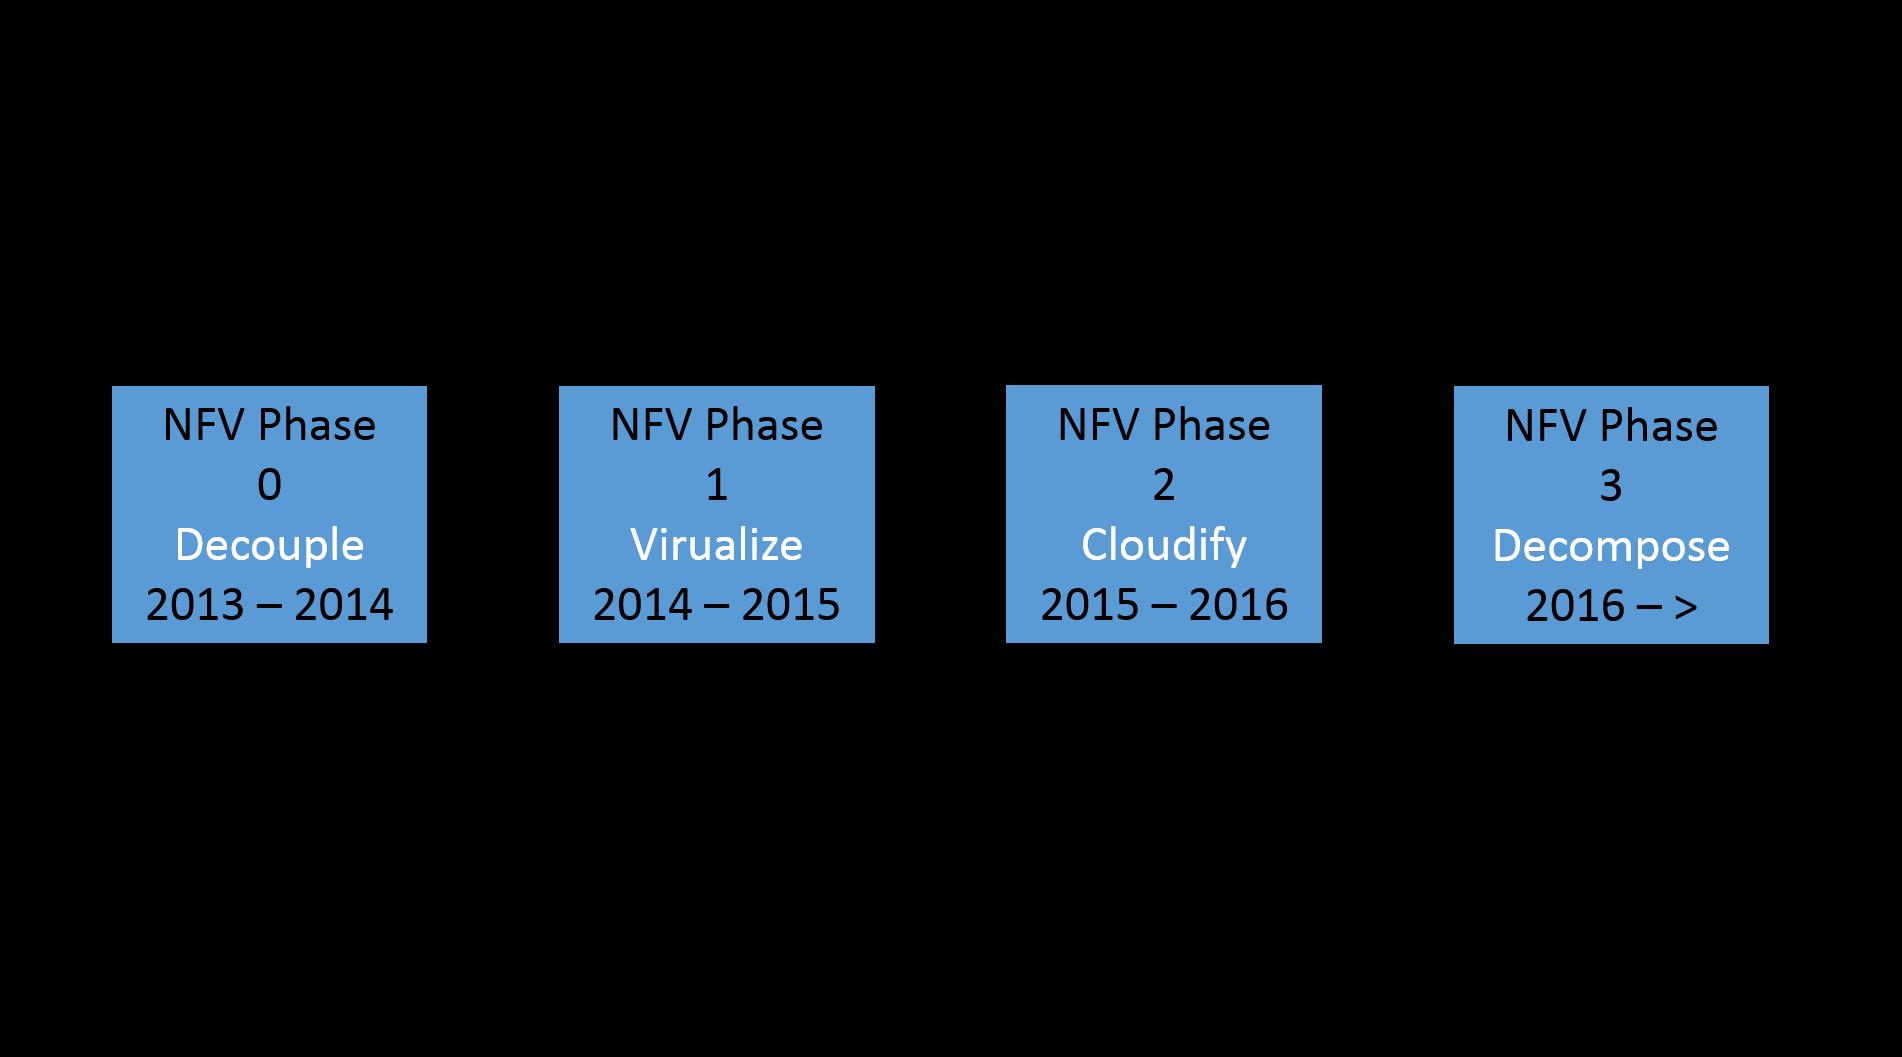 NFV technoligy is evolving in stages